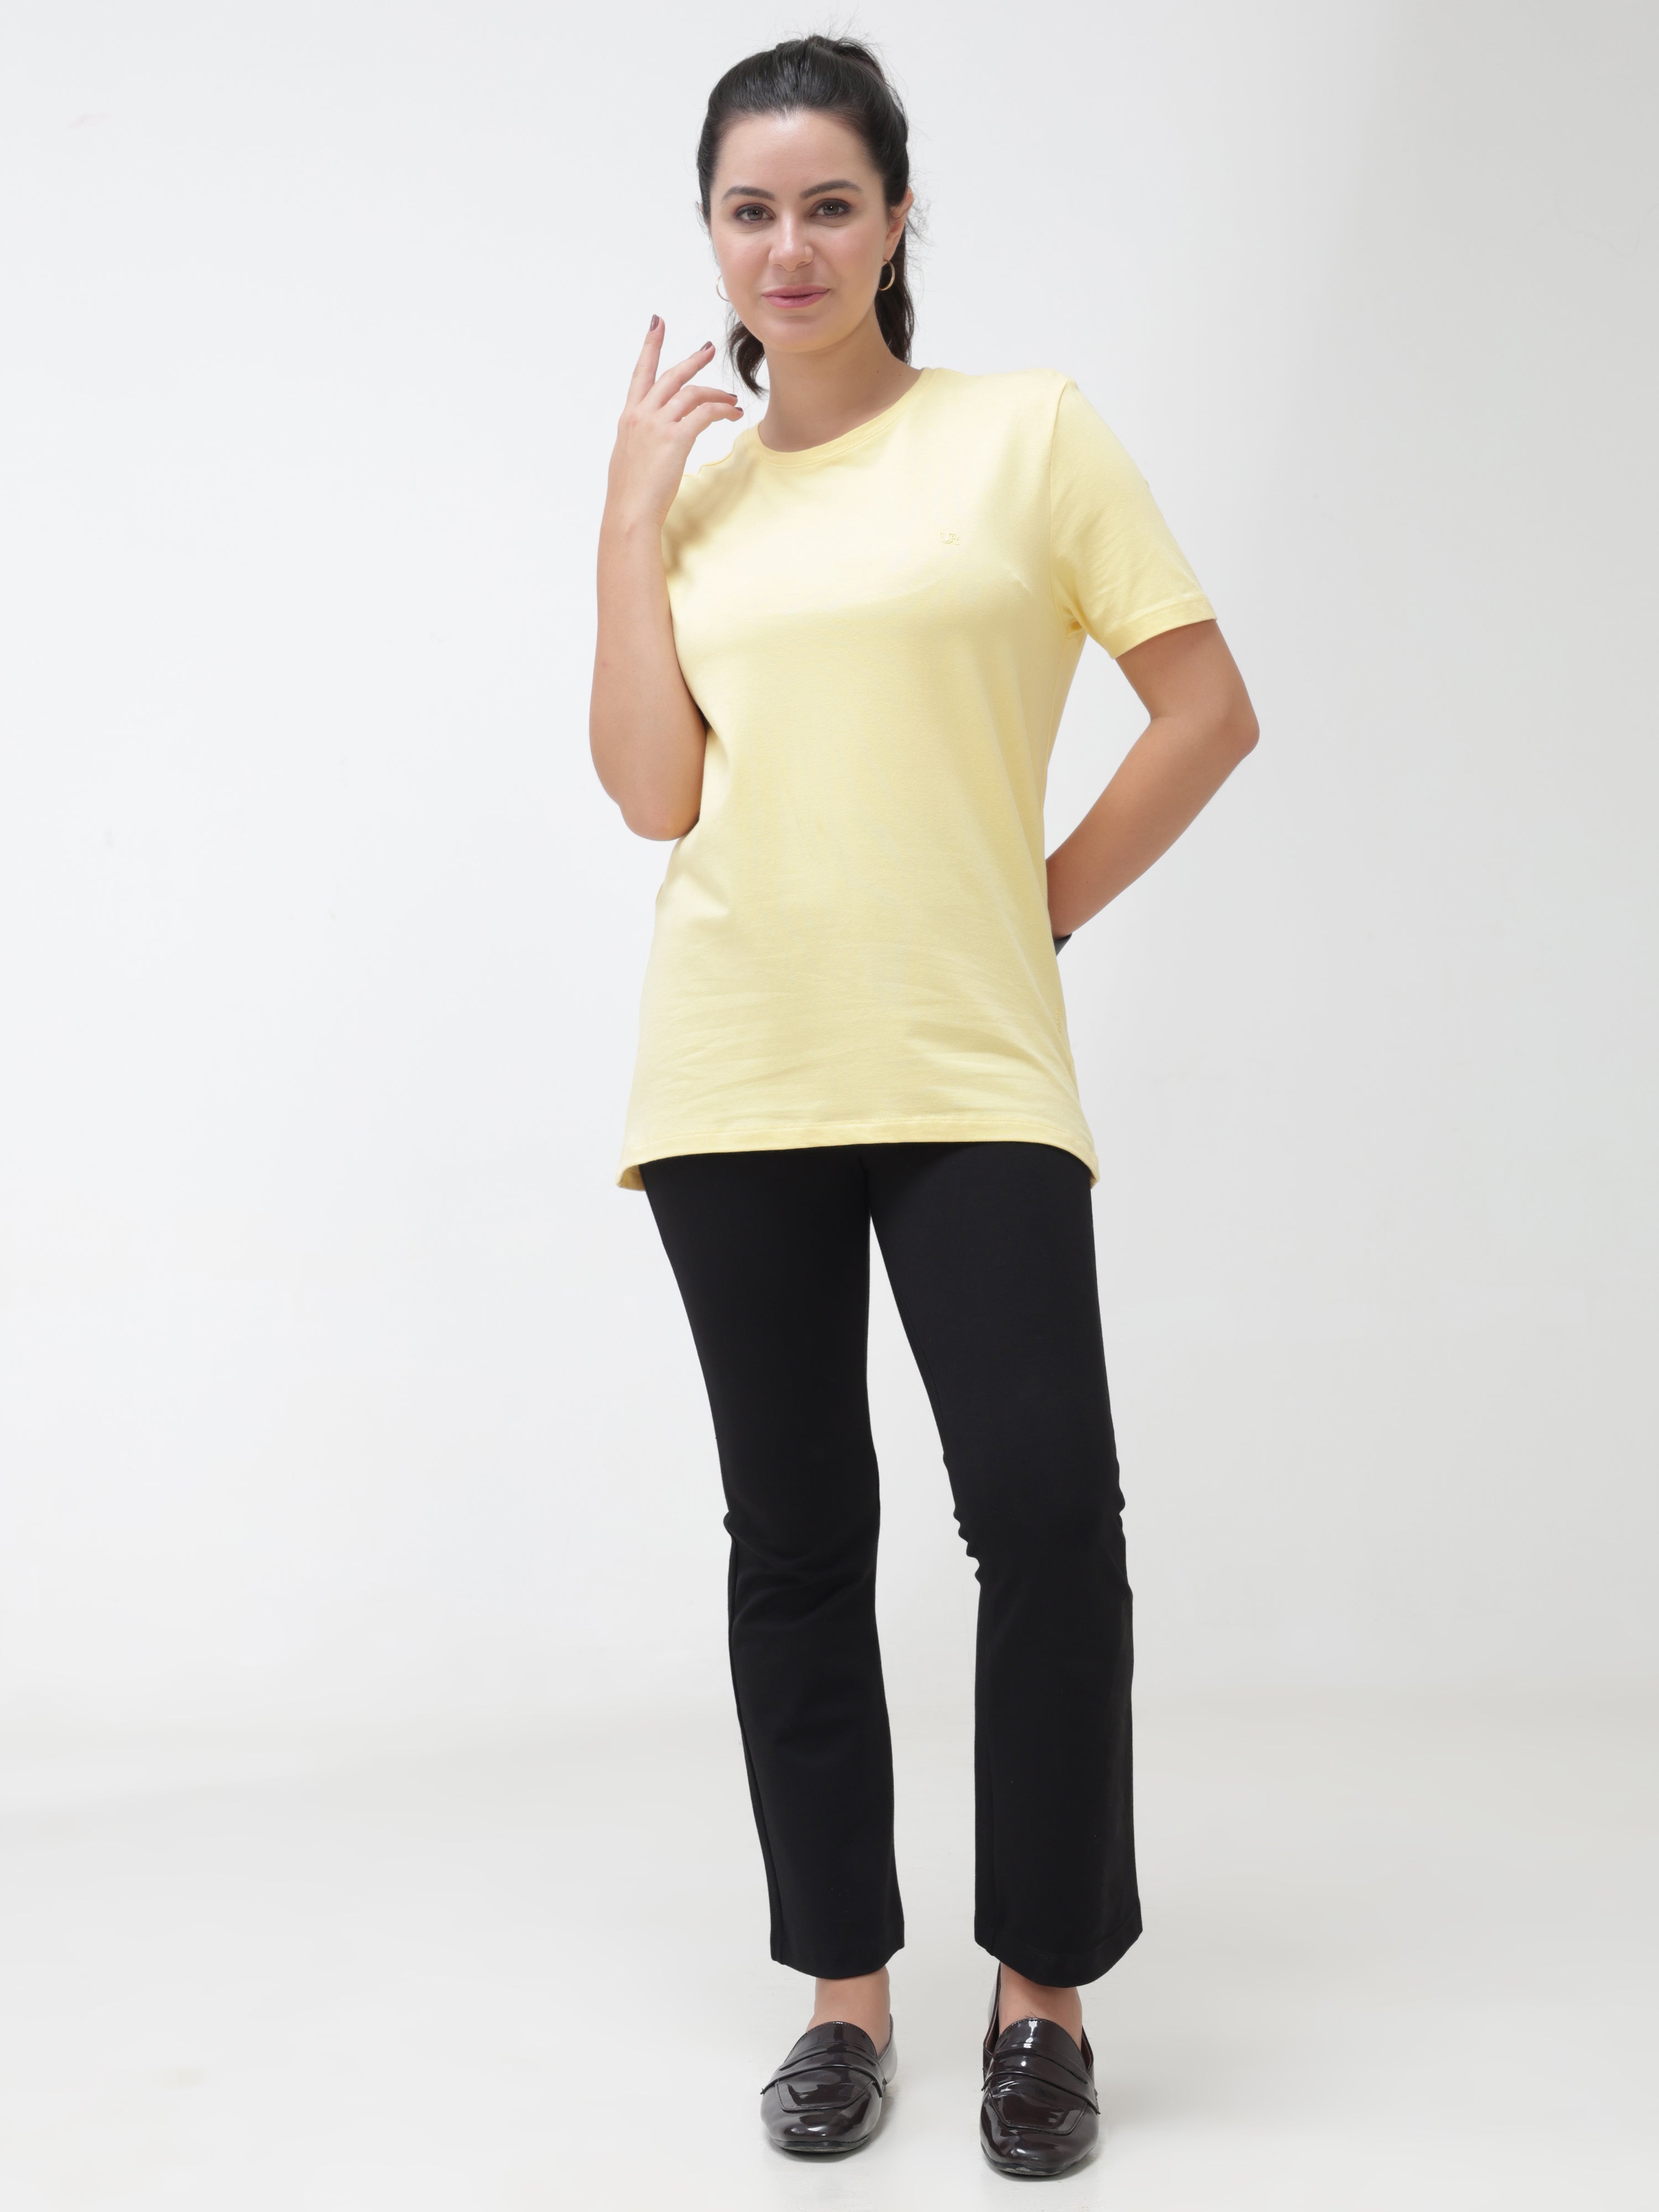 Stylish woman in yellow round-neck cotton T-shirt and black pants, showcasing casual wear and new shirt for men trends.